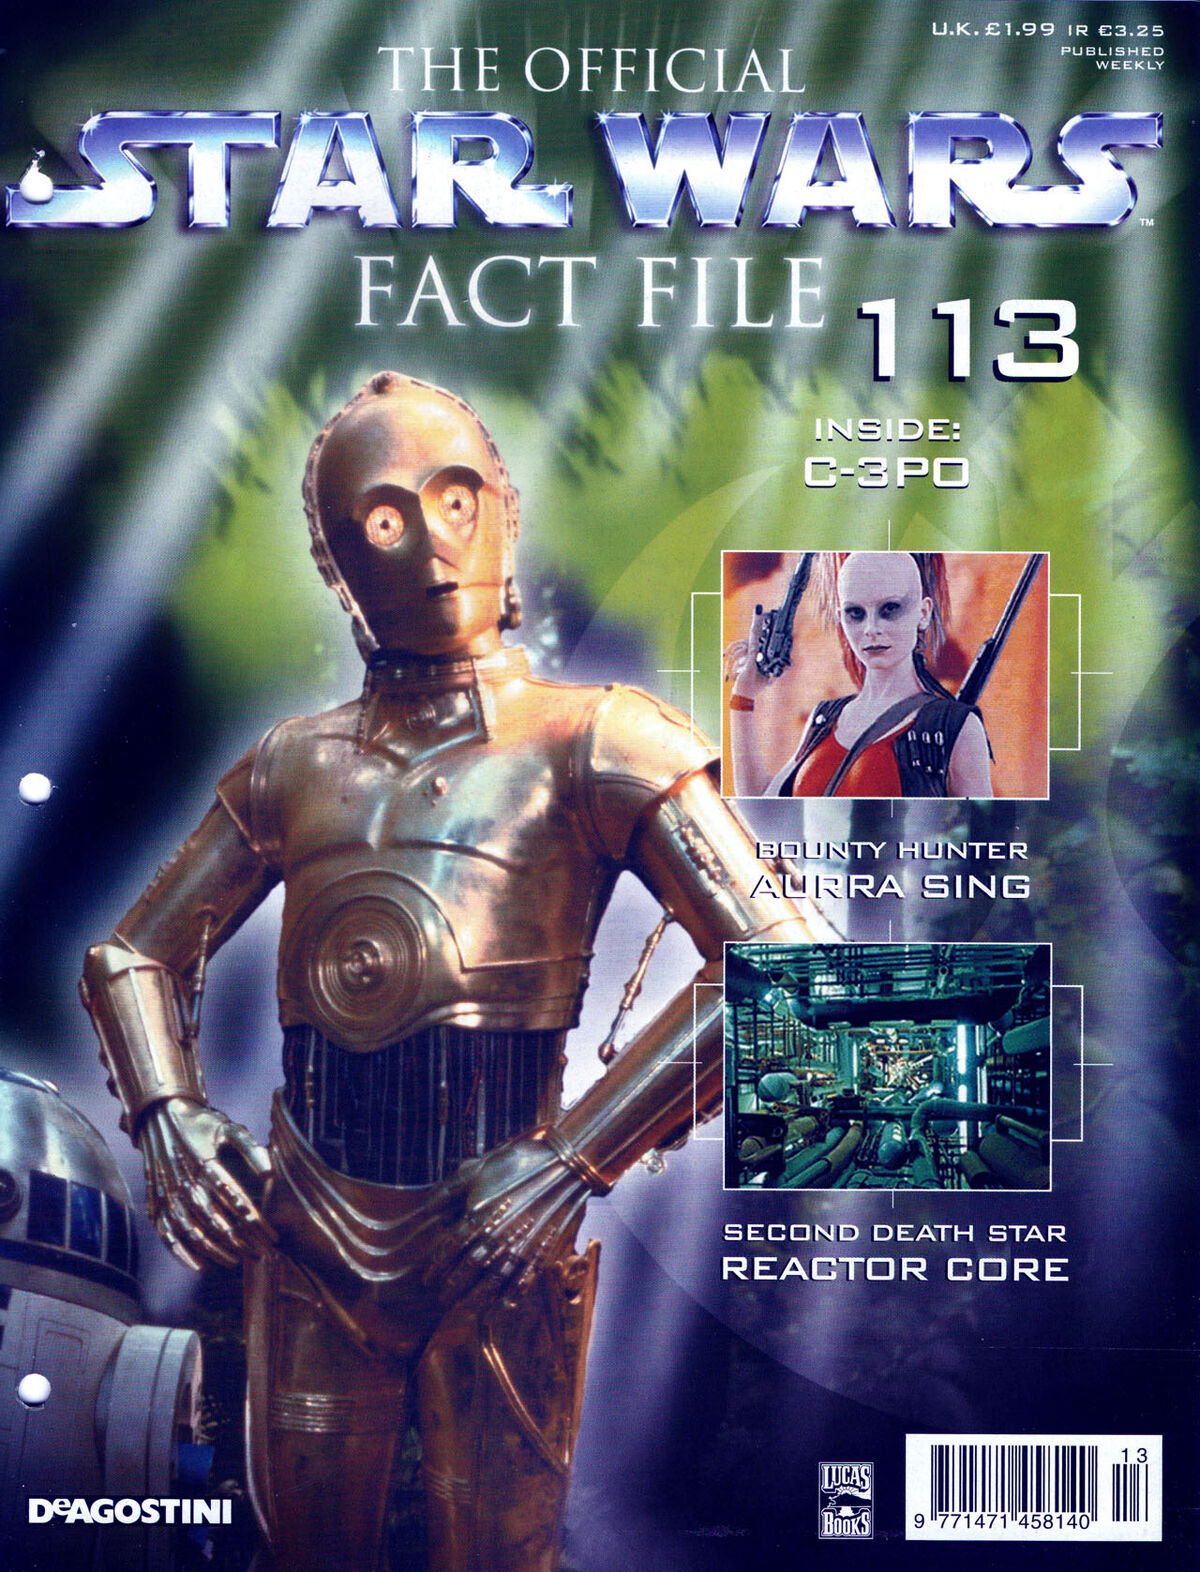 The Official Star Wars Fact File 113 | Wookieepedia | Fandom